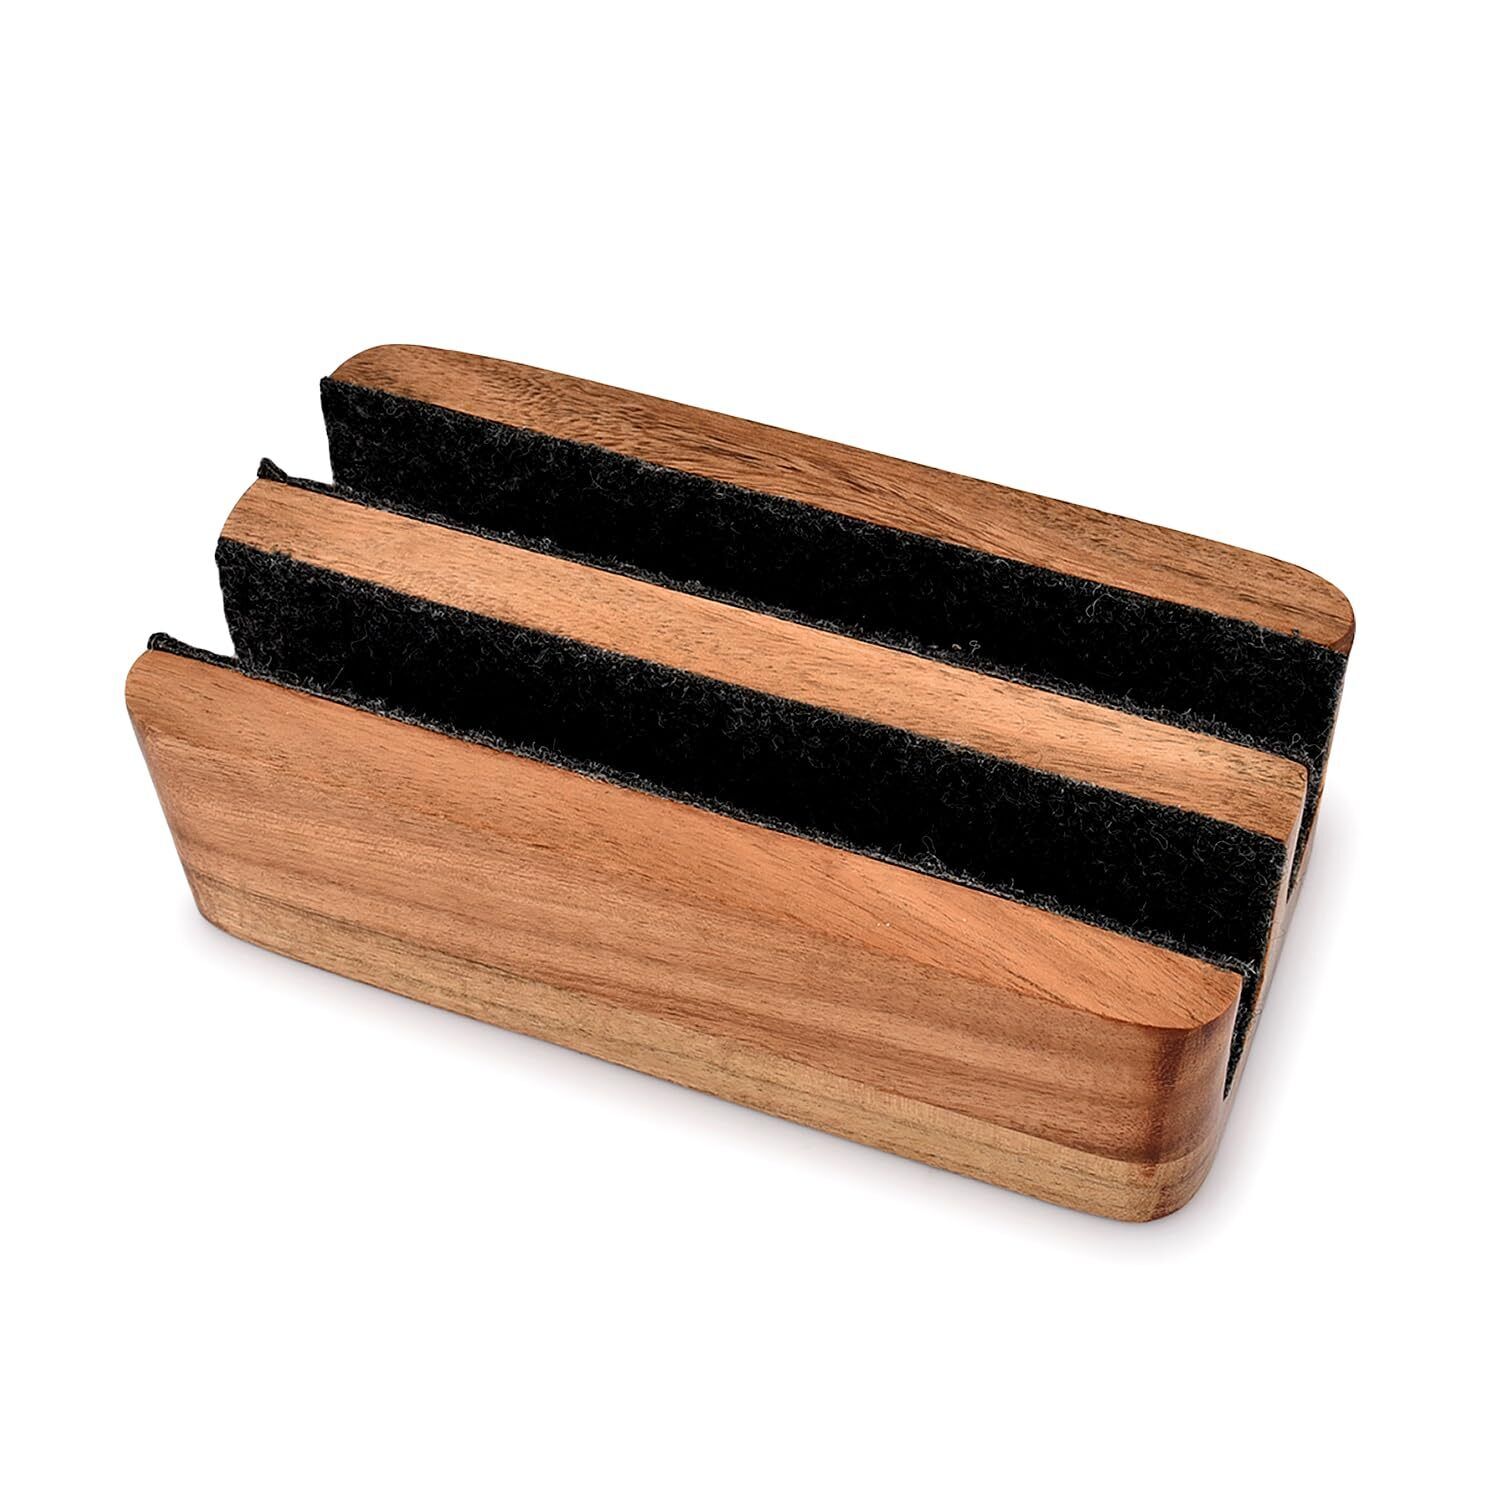 Laptop Holder Acacia Wood Laptop Vertical Stand Fits MacBook Pro and Other La...